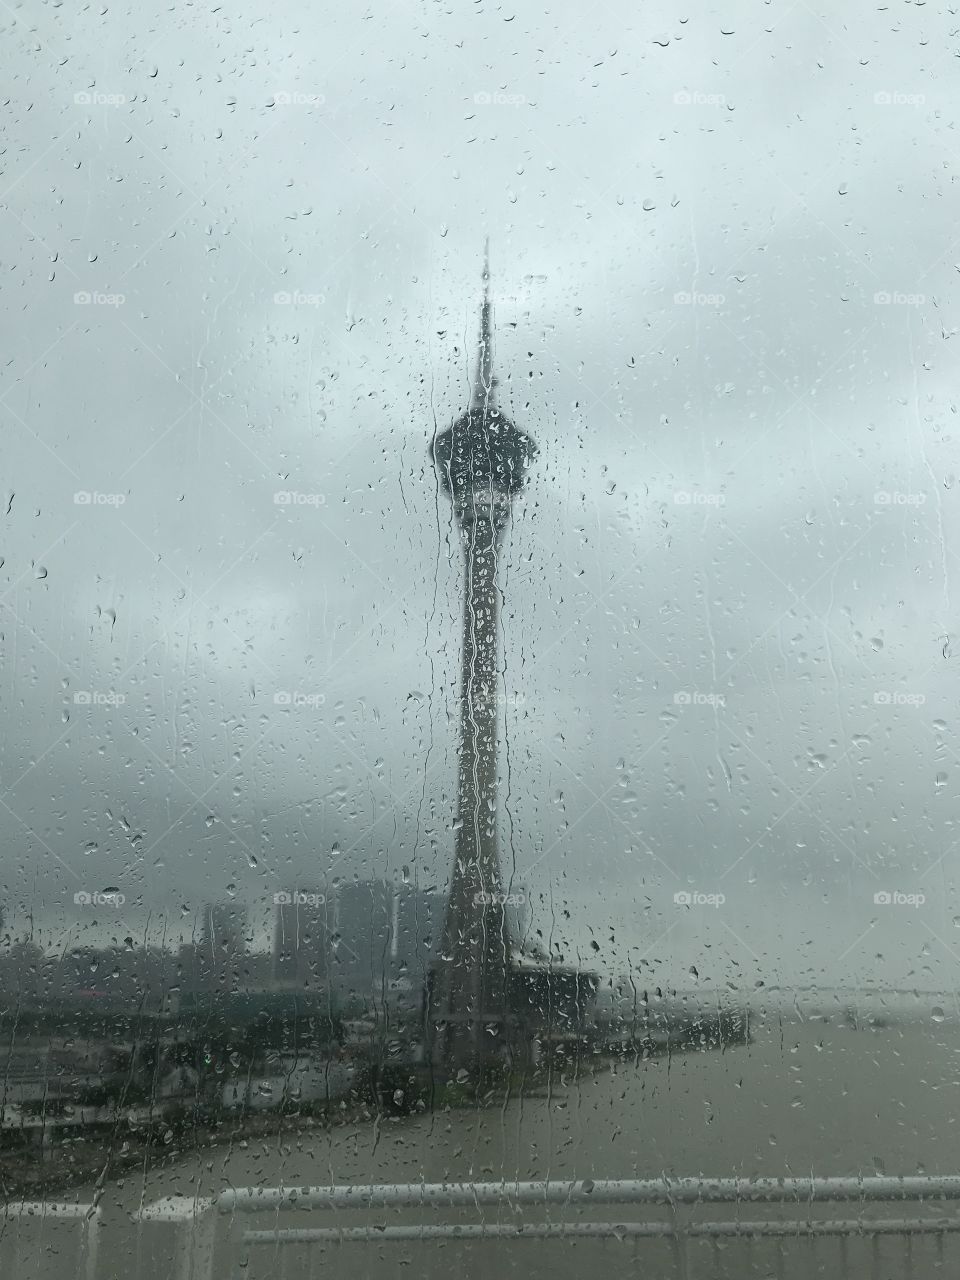 Macao tower